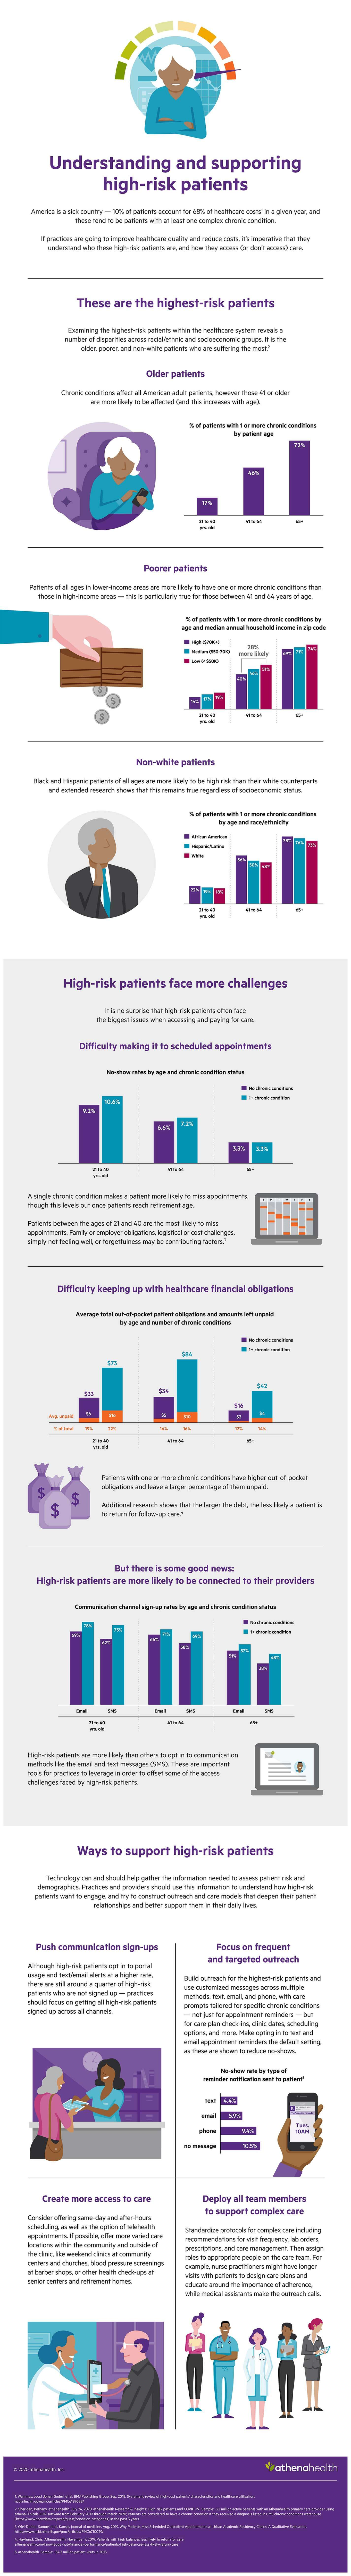 athenahealth Infographic Data Understanding and Supporting High-Risk Patients